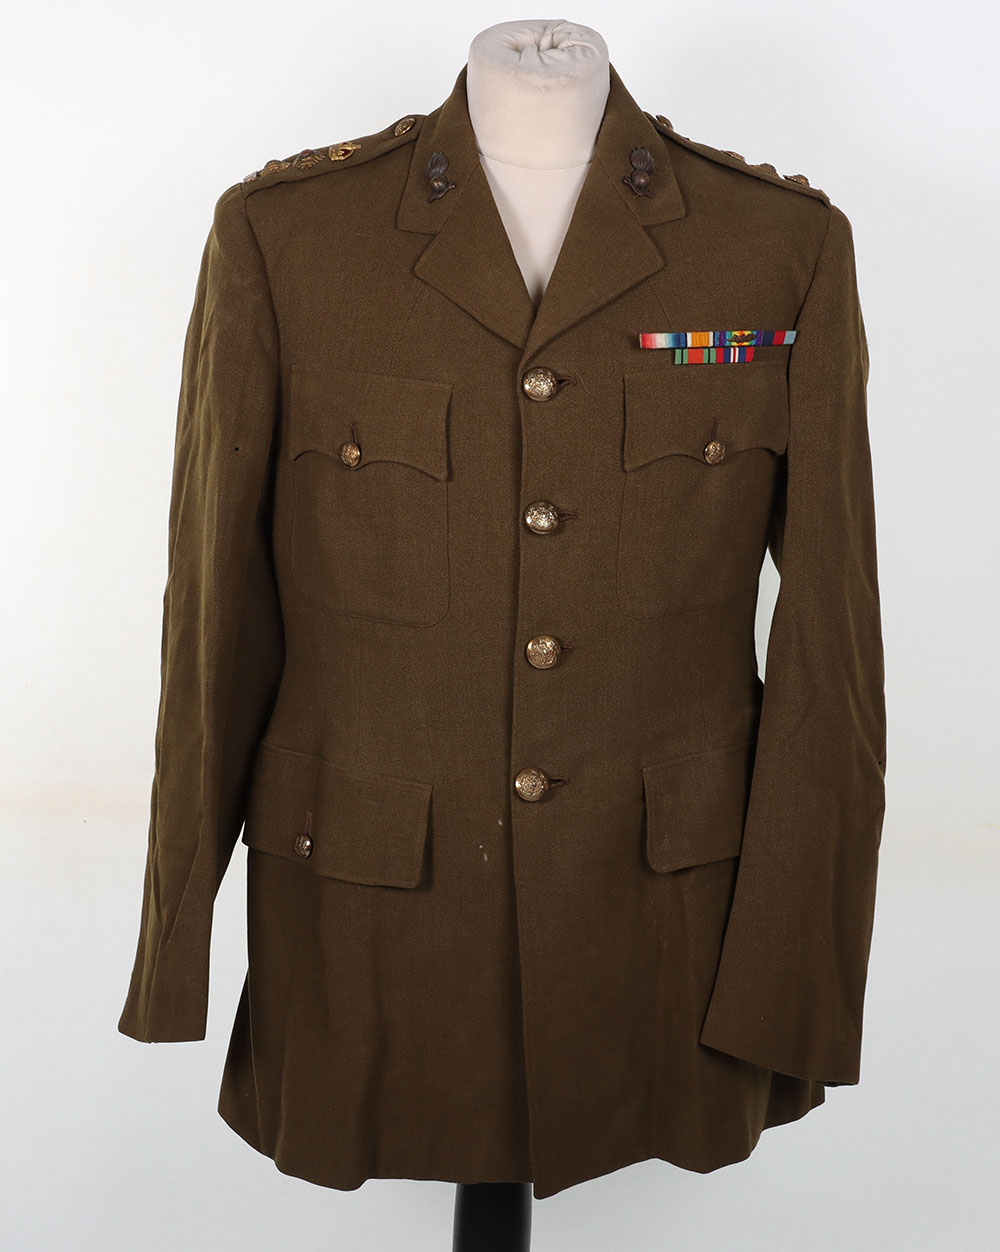 WW2 British Officers Service Dress Tunic of Colonel Robert H Sims 2nd Battalion Royal Welch Fusilier